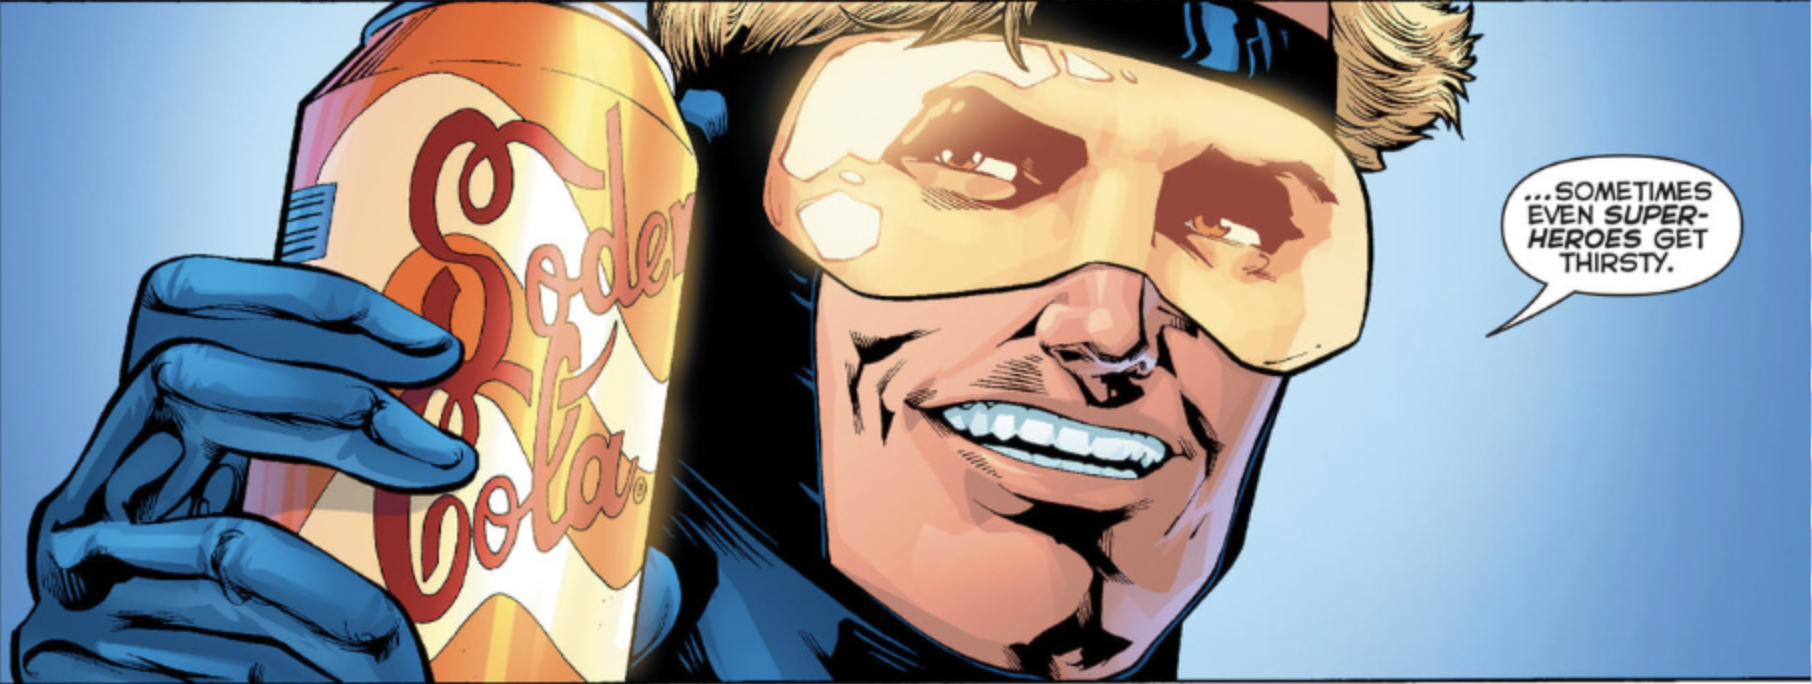 Booster Gold, plugging a soda brand after doing some super heroism